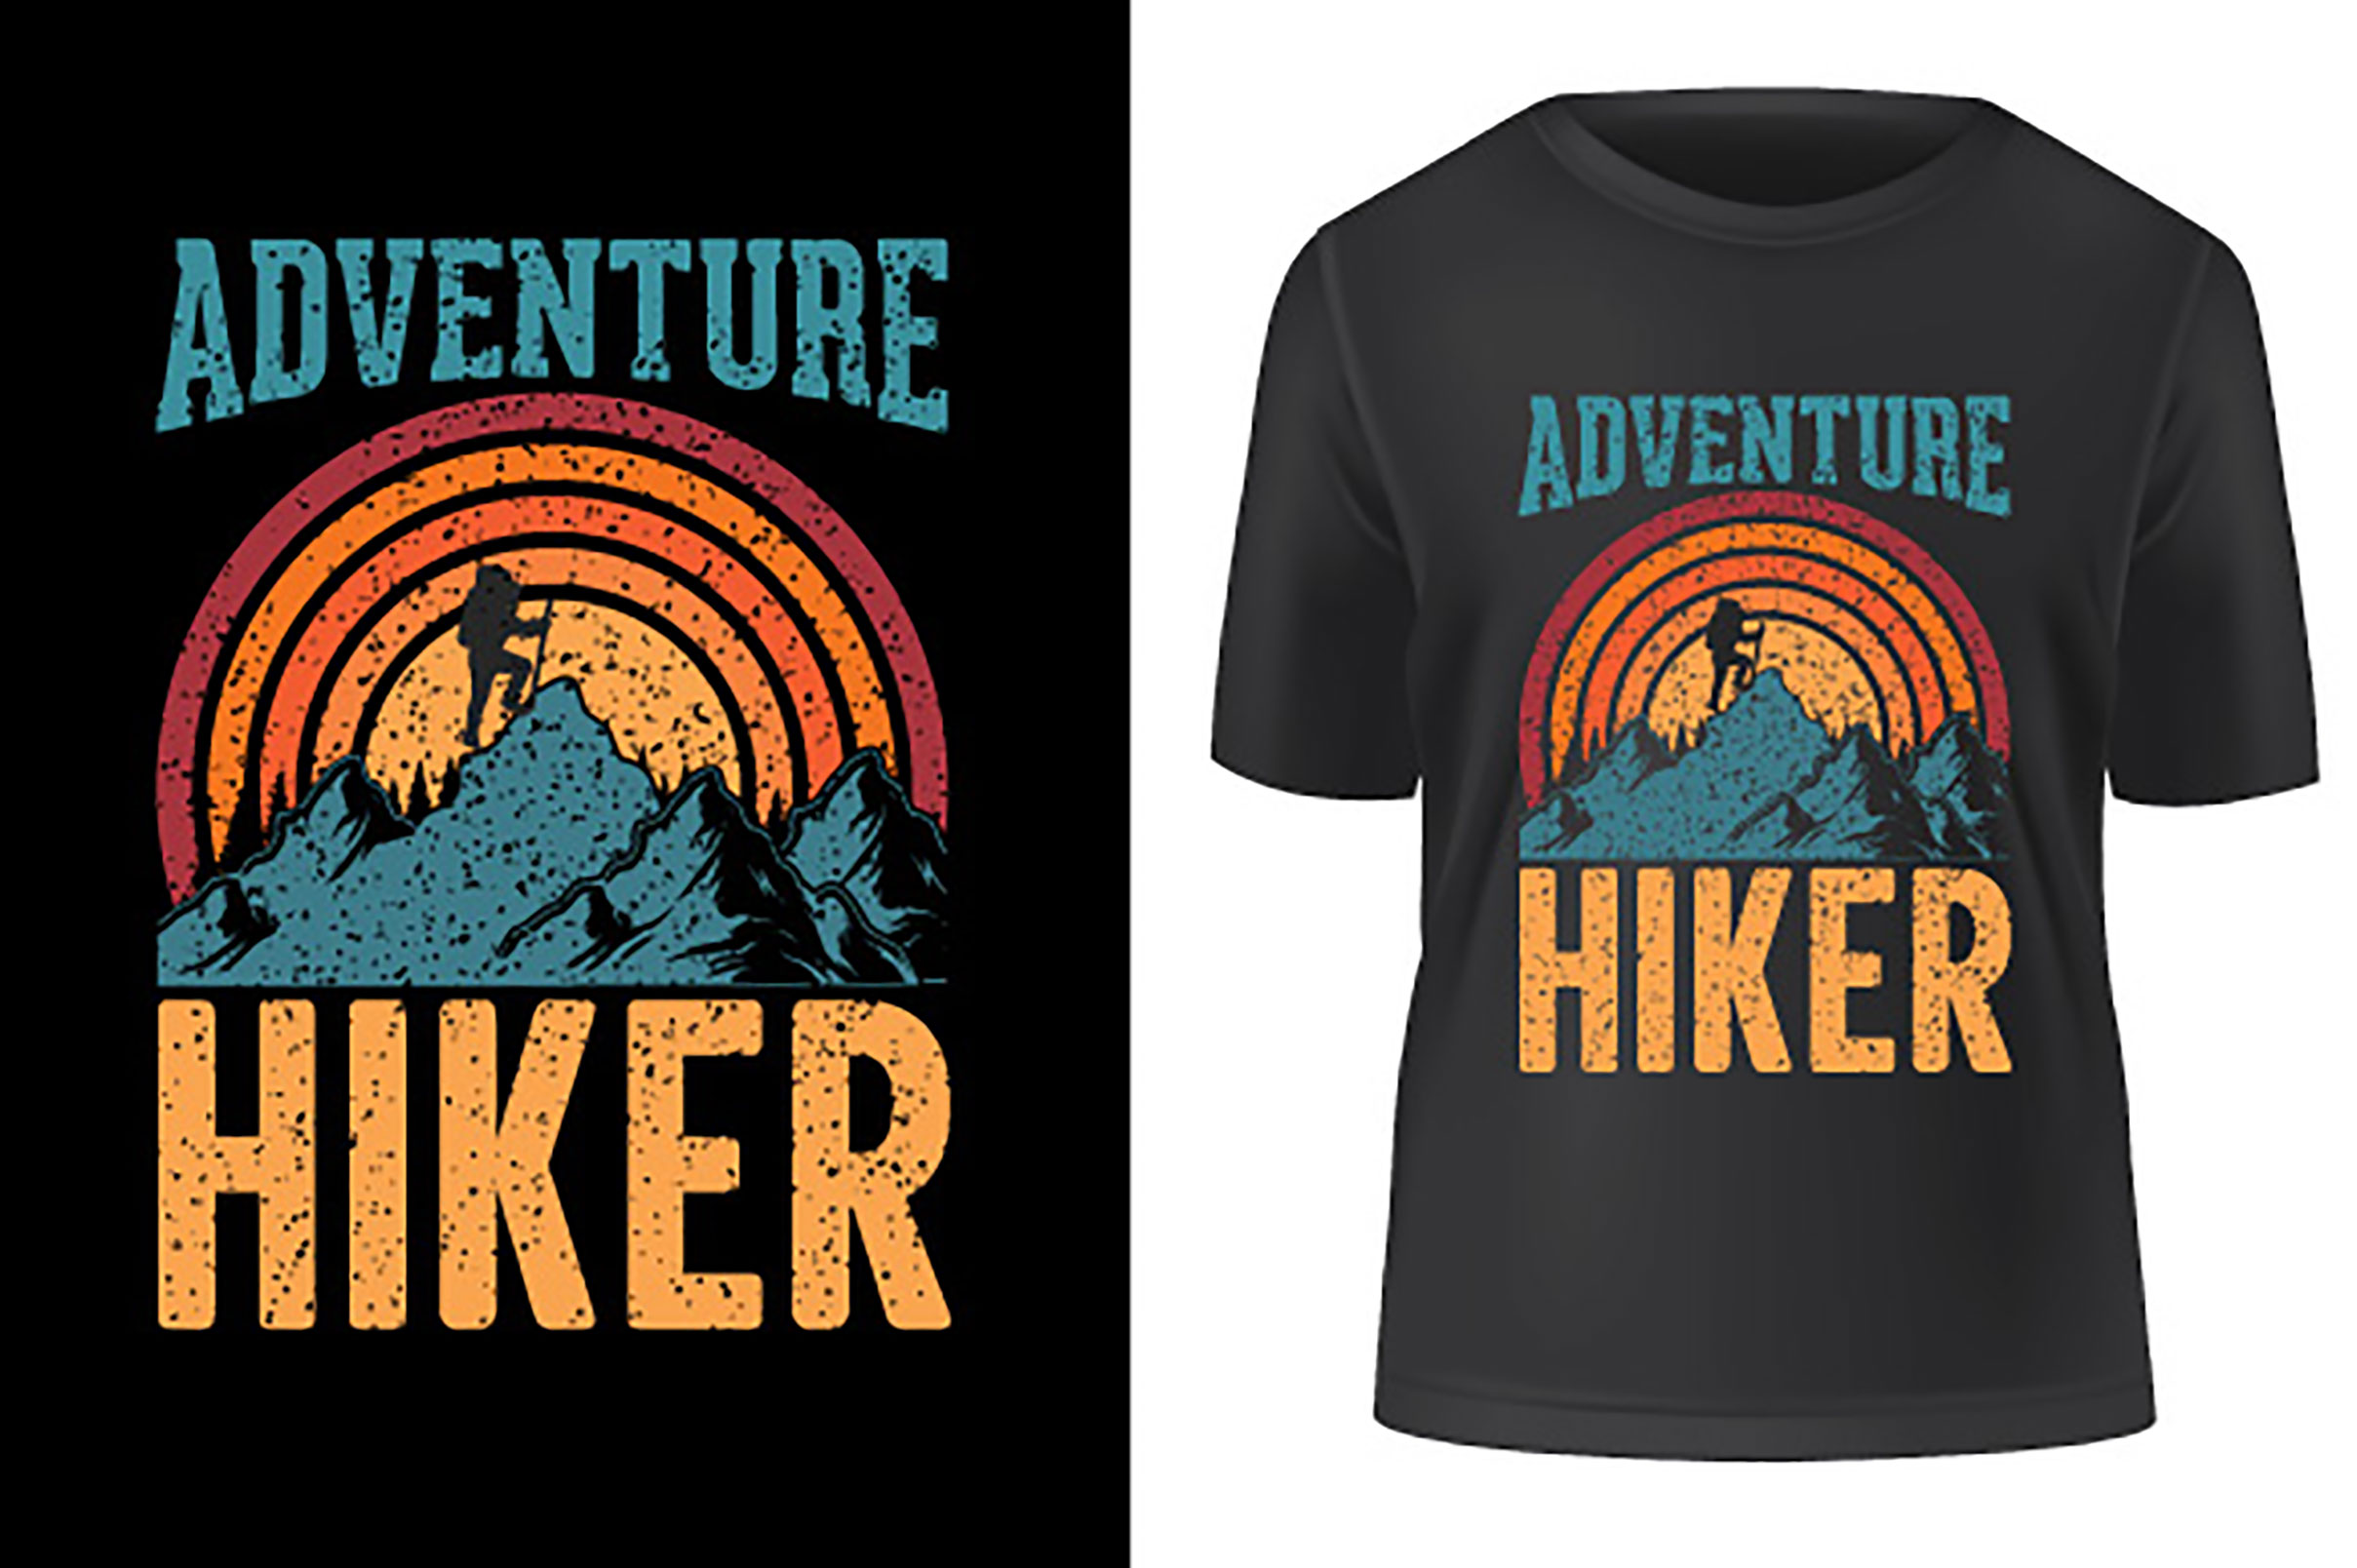 Adventure hiking design like t-shirt Lovers pinterest preview image.